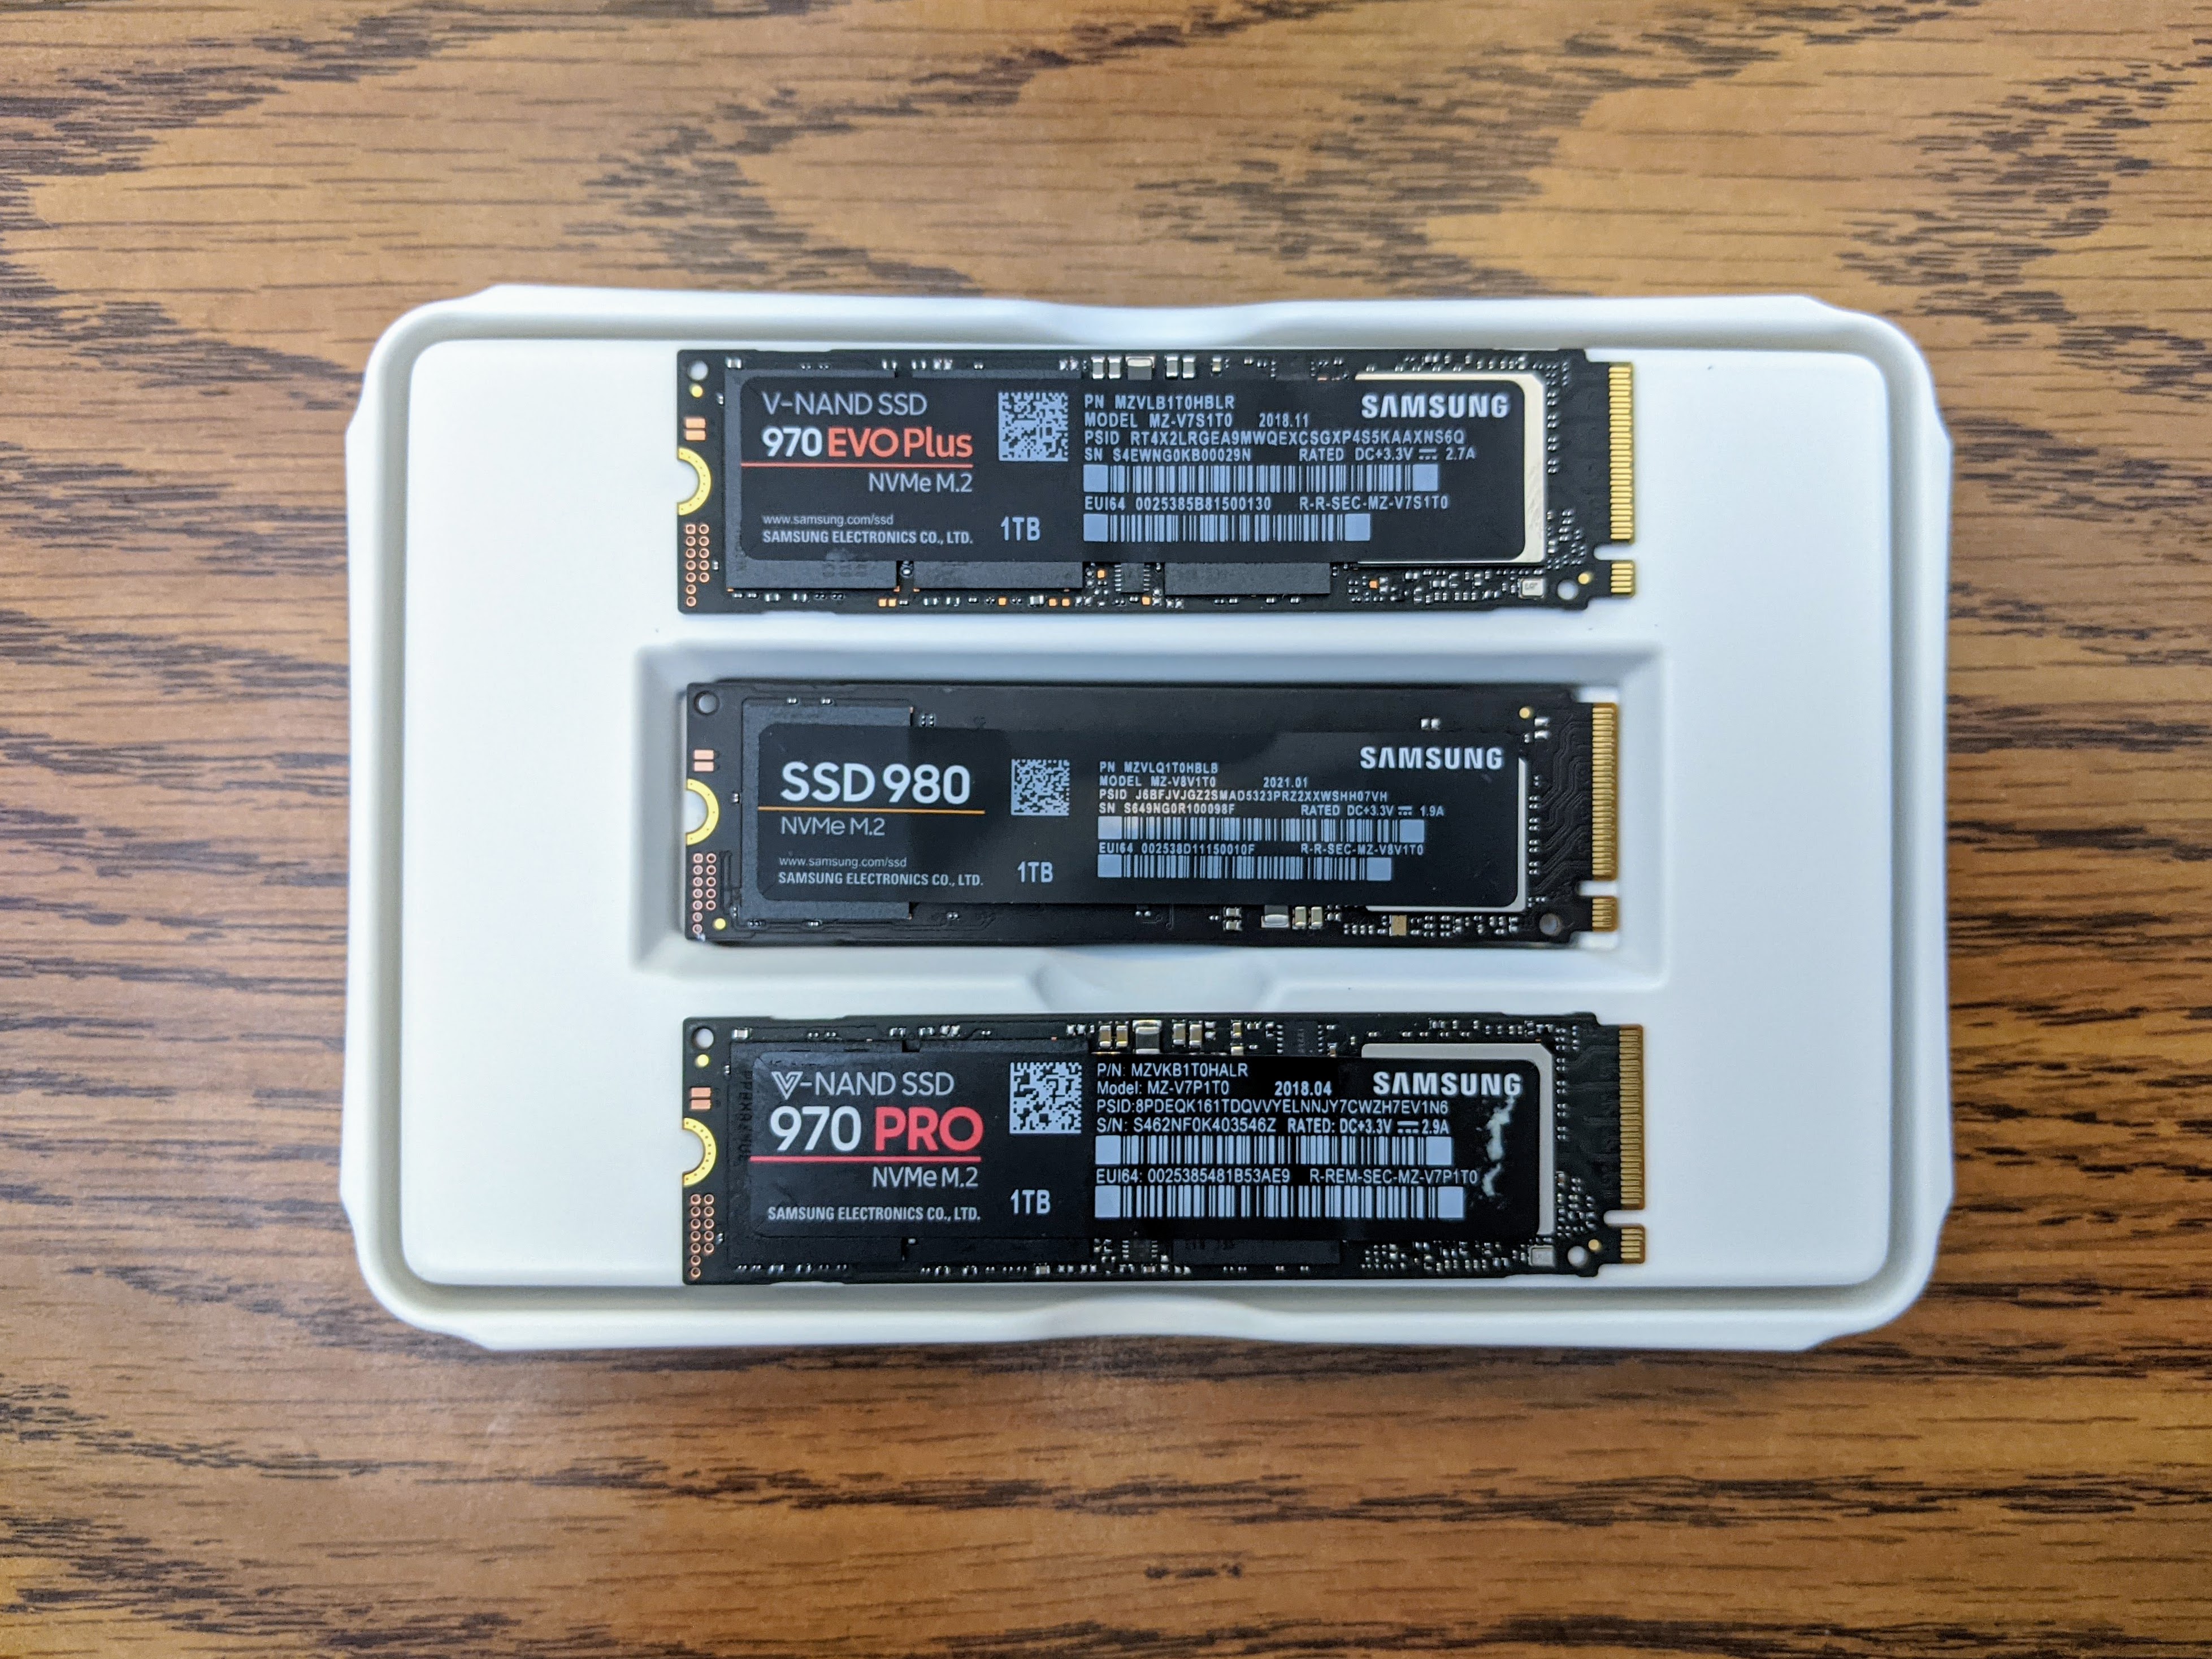 greenhouse worm Marquee New Samsung 980 SSD improves on 970 EVO, EVO Plus performance | Ars Technica